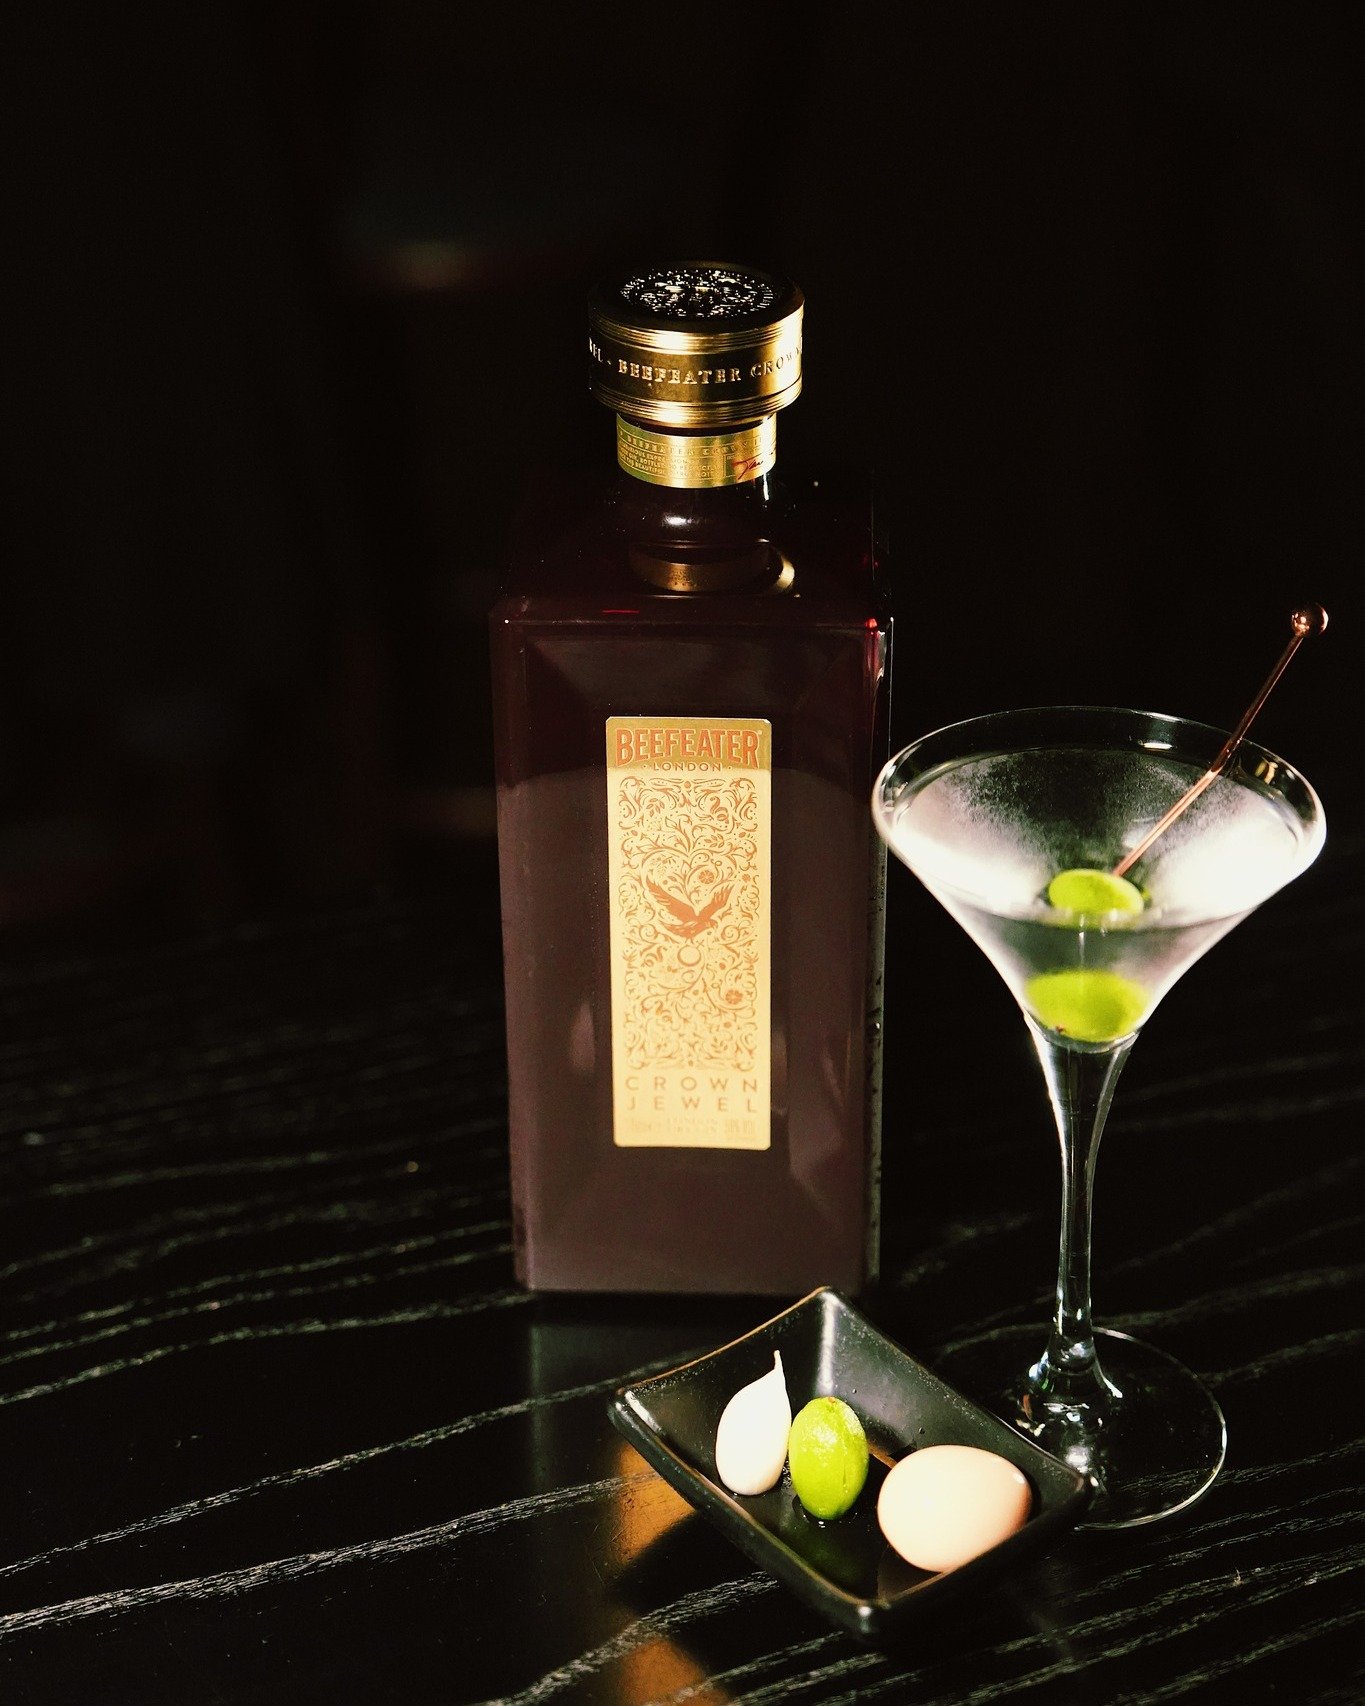 Introducing Coronation, where the classiest classic goes haute couture! 

Crafted with premium Beefeater Crown Jewel Gin and homemade Ginjo sake-vermouth, this elevated take on The Gibson is served at the table. 

Accompanied by a trio of delectable 